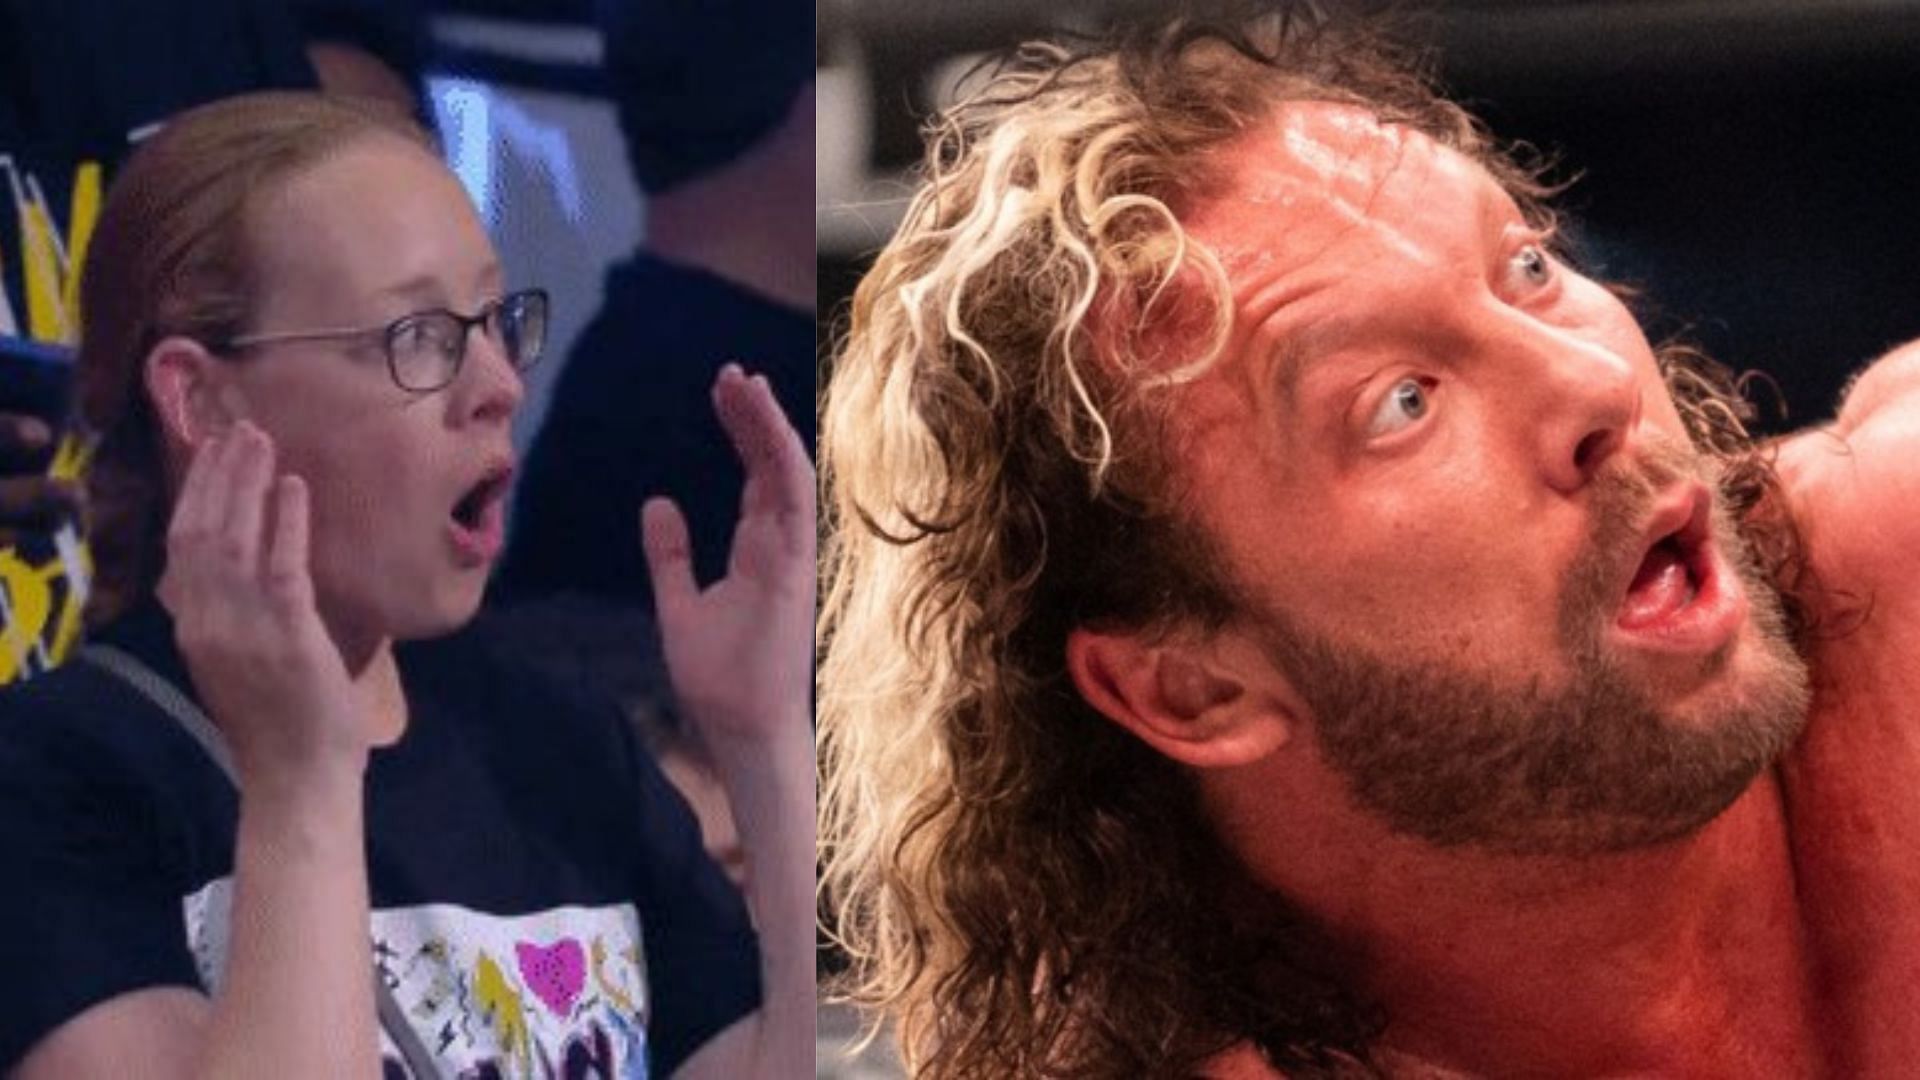 Kenny Omega was attacked by a former WWE star